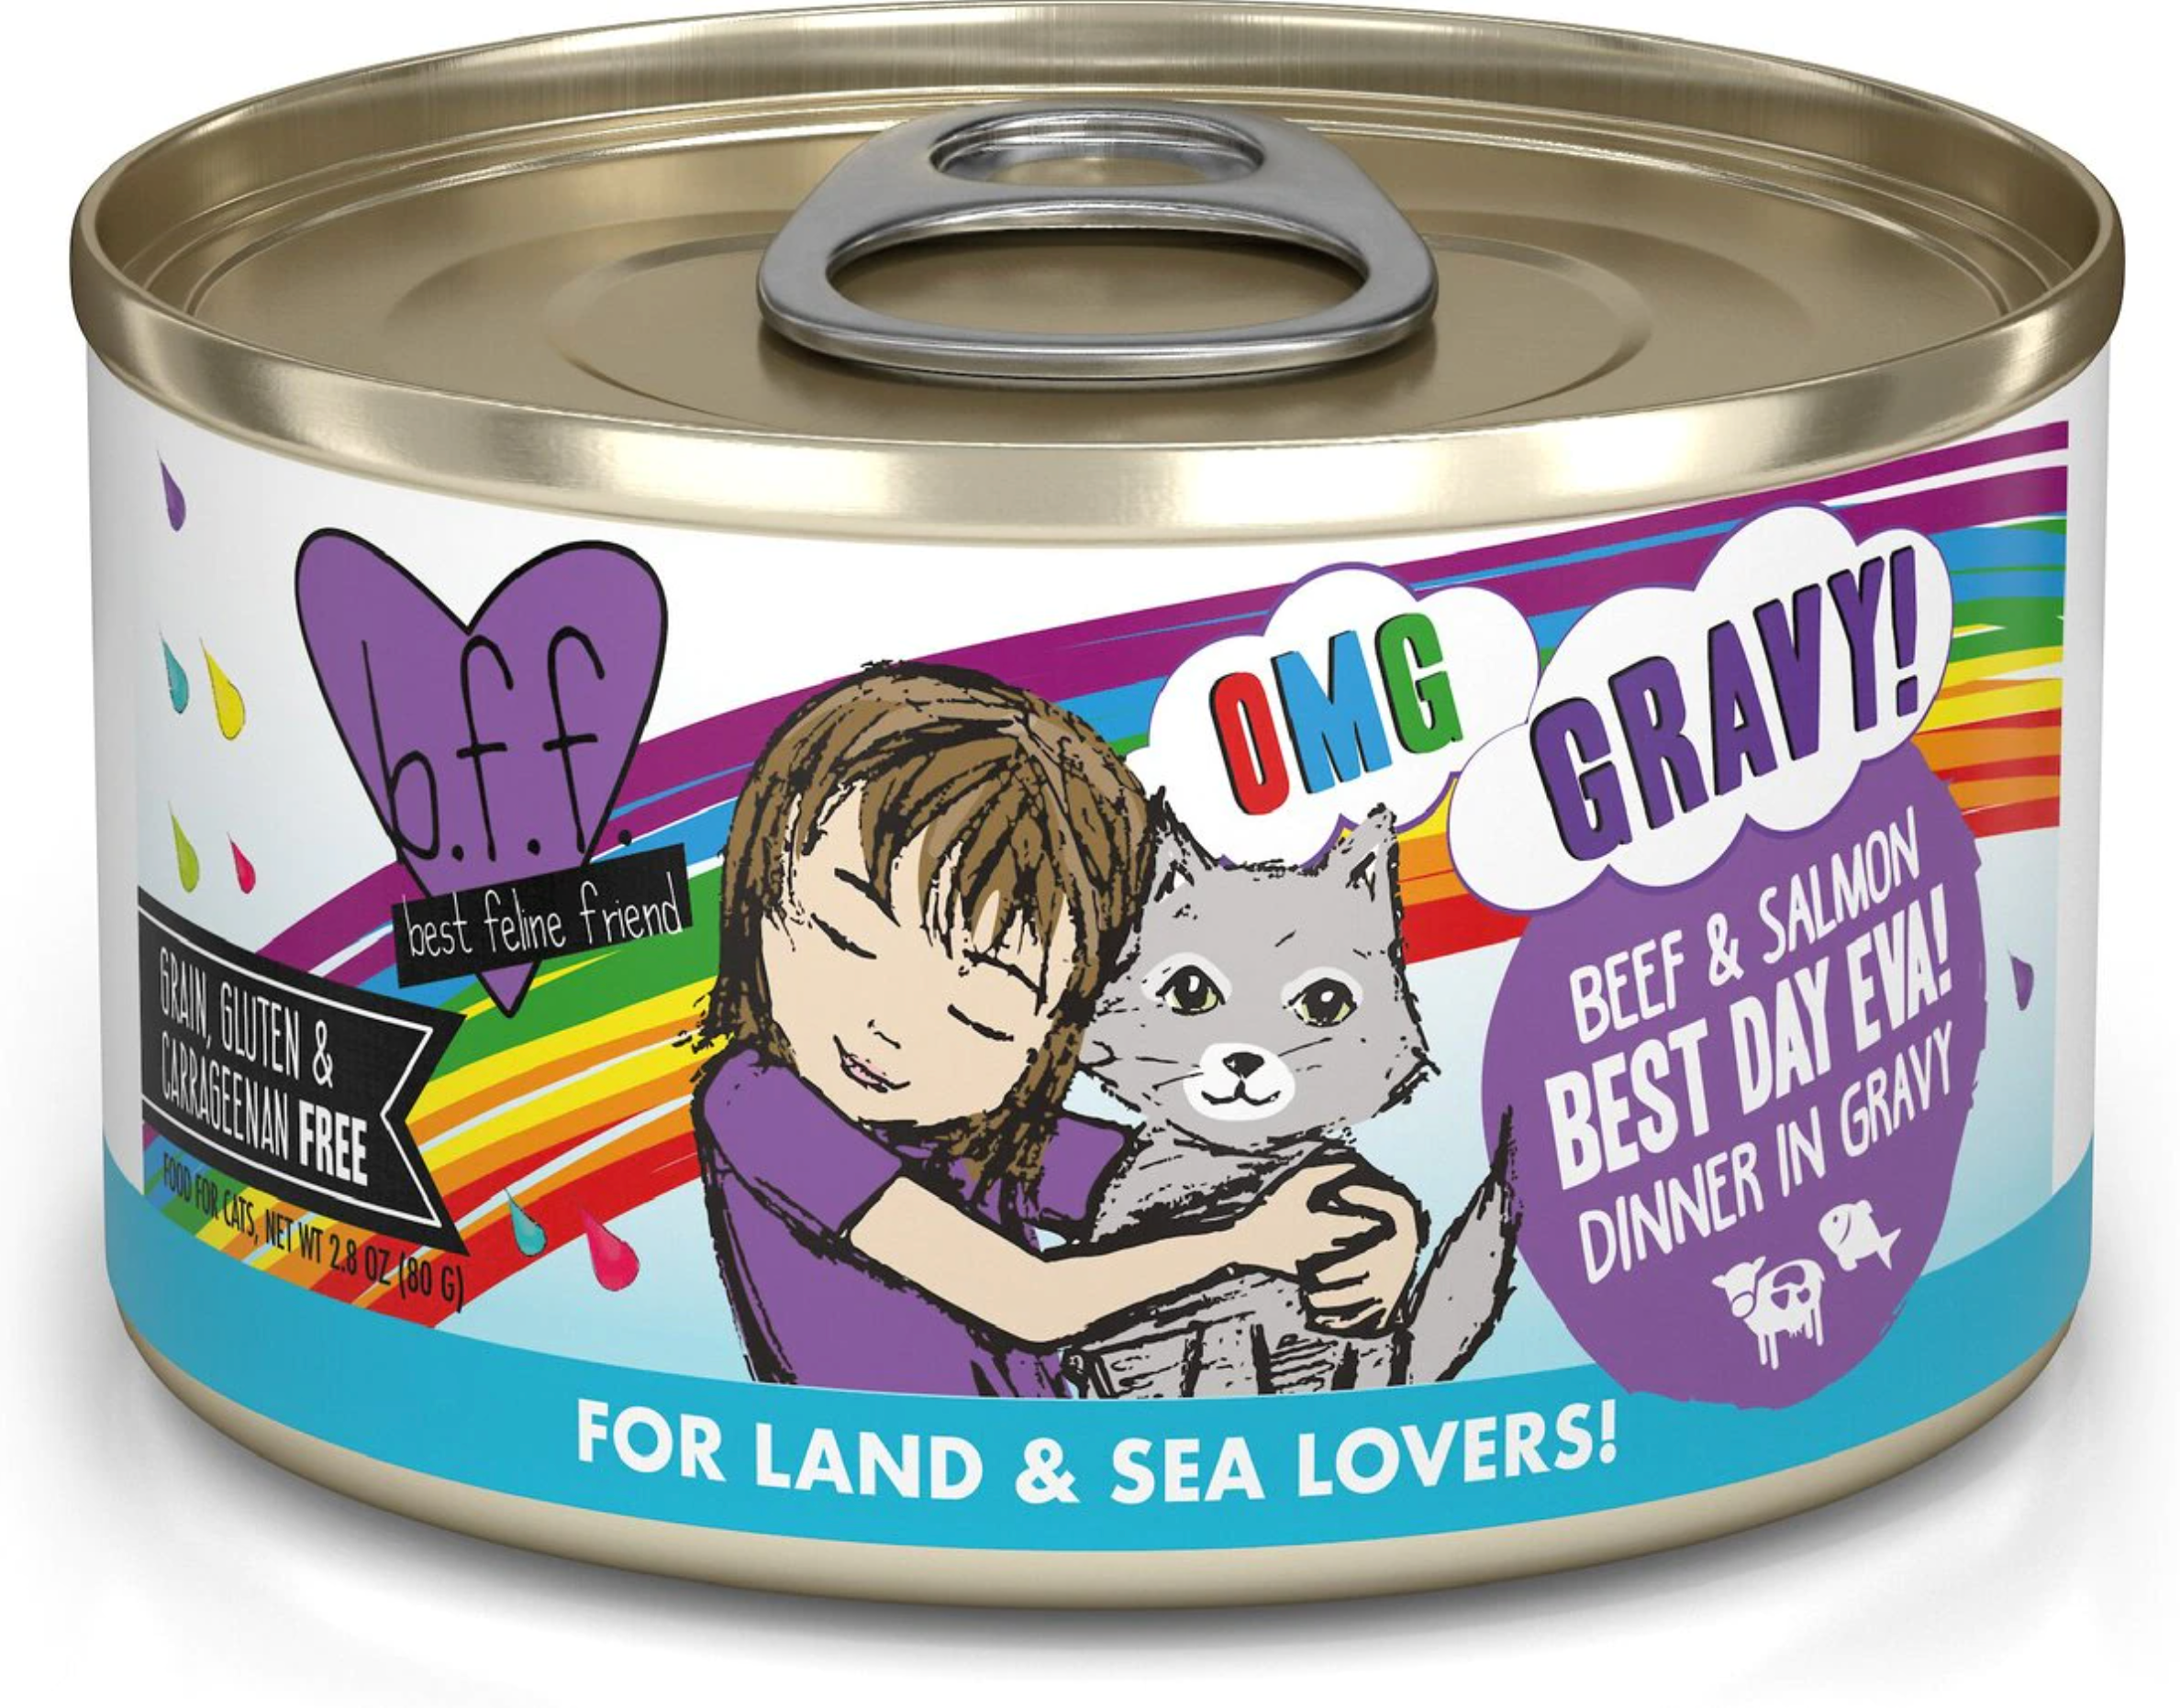 BFF OMG Best Day Eva! Beef & Salmon Dinner in Gravy Grain-Free Canned Cat Food, 12 pack 2.8 oz. cans